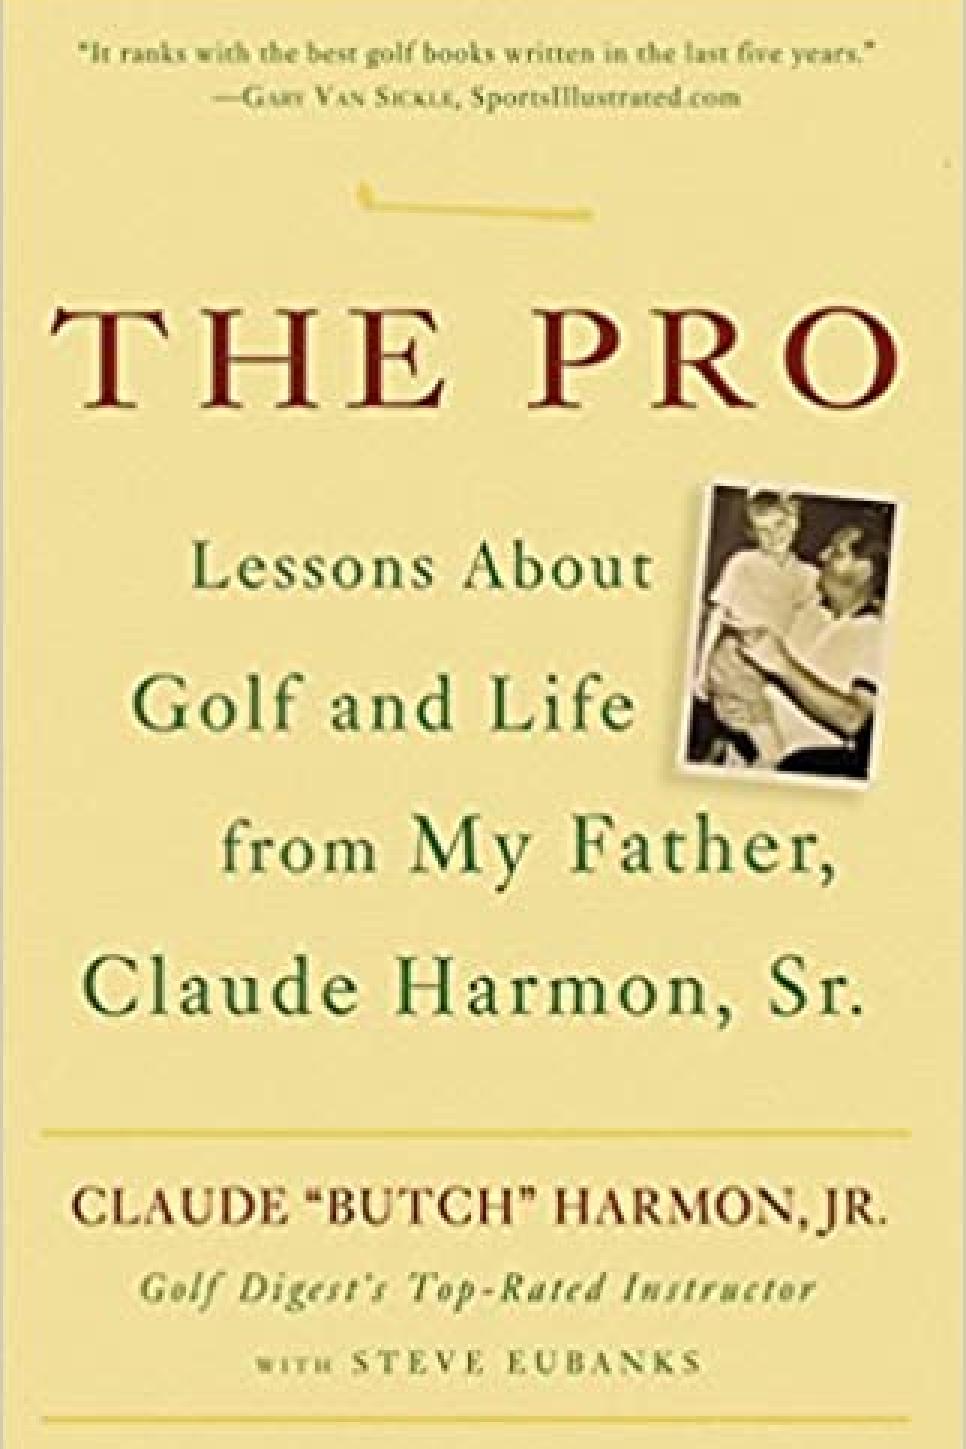 rx-amazonthe-pro-lessons-about-golf-and-life-from-my-father-claude-harmon-sr-by-claude-butch-harmon-jr-2006.jpeg